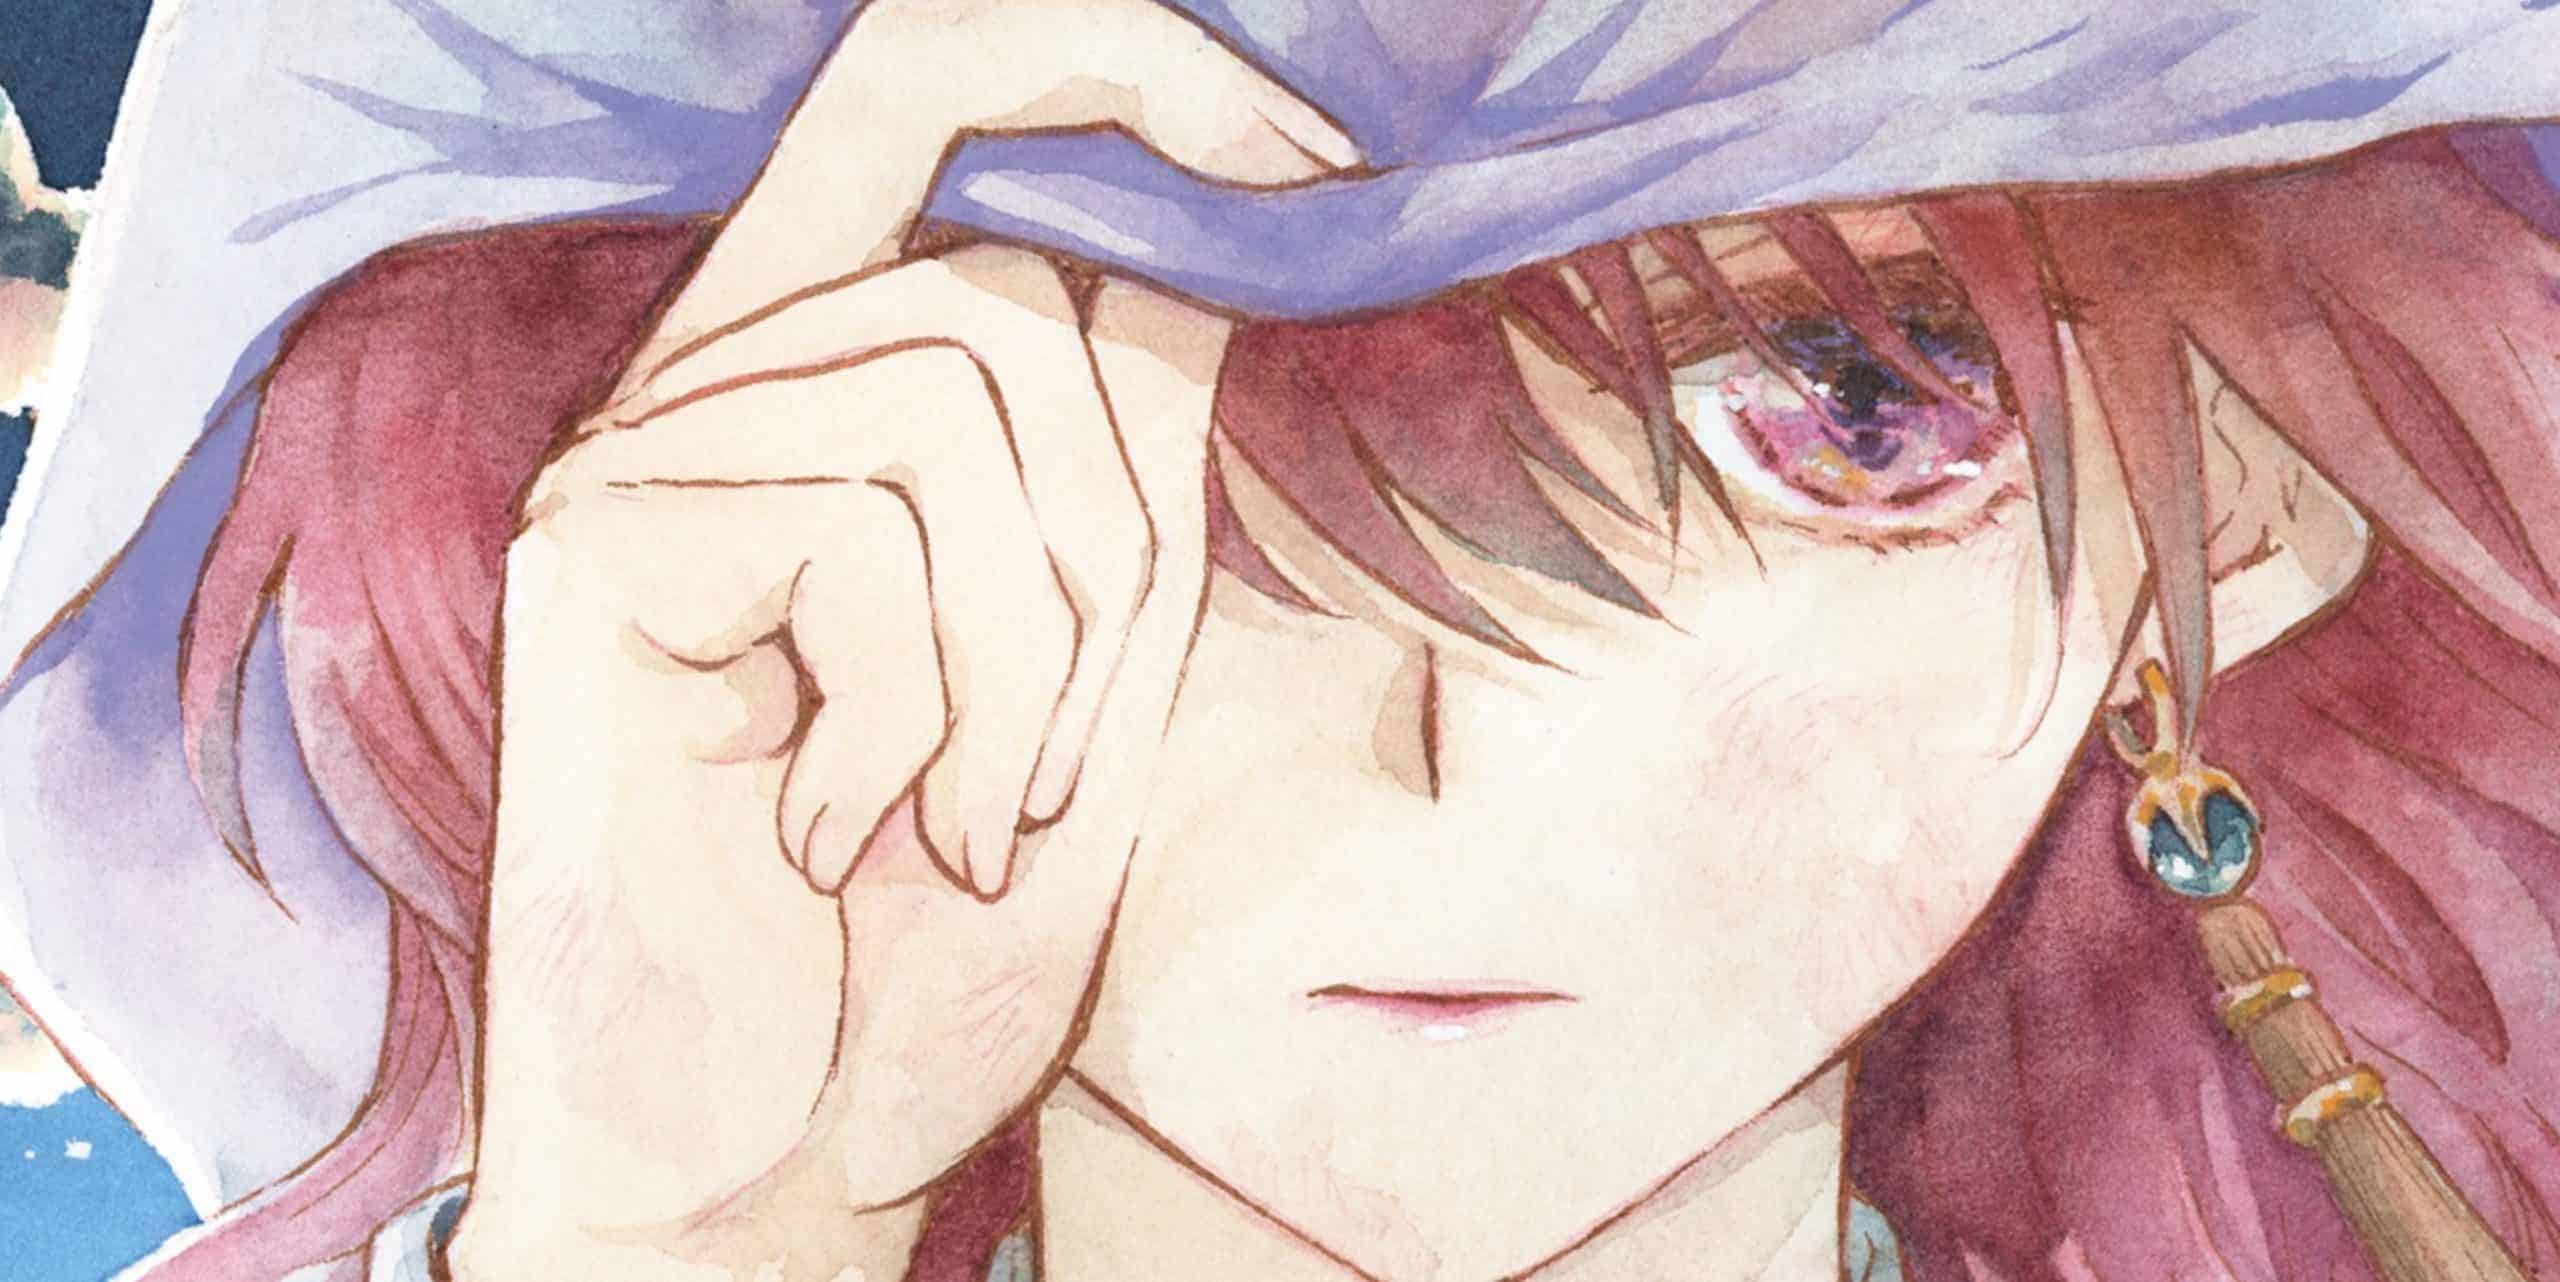 Yona of the Dawn Chapter 248 Release DateYona of the Dawn Chapter 248 Release Date Details